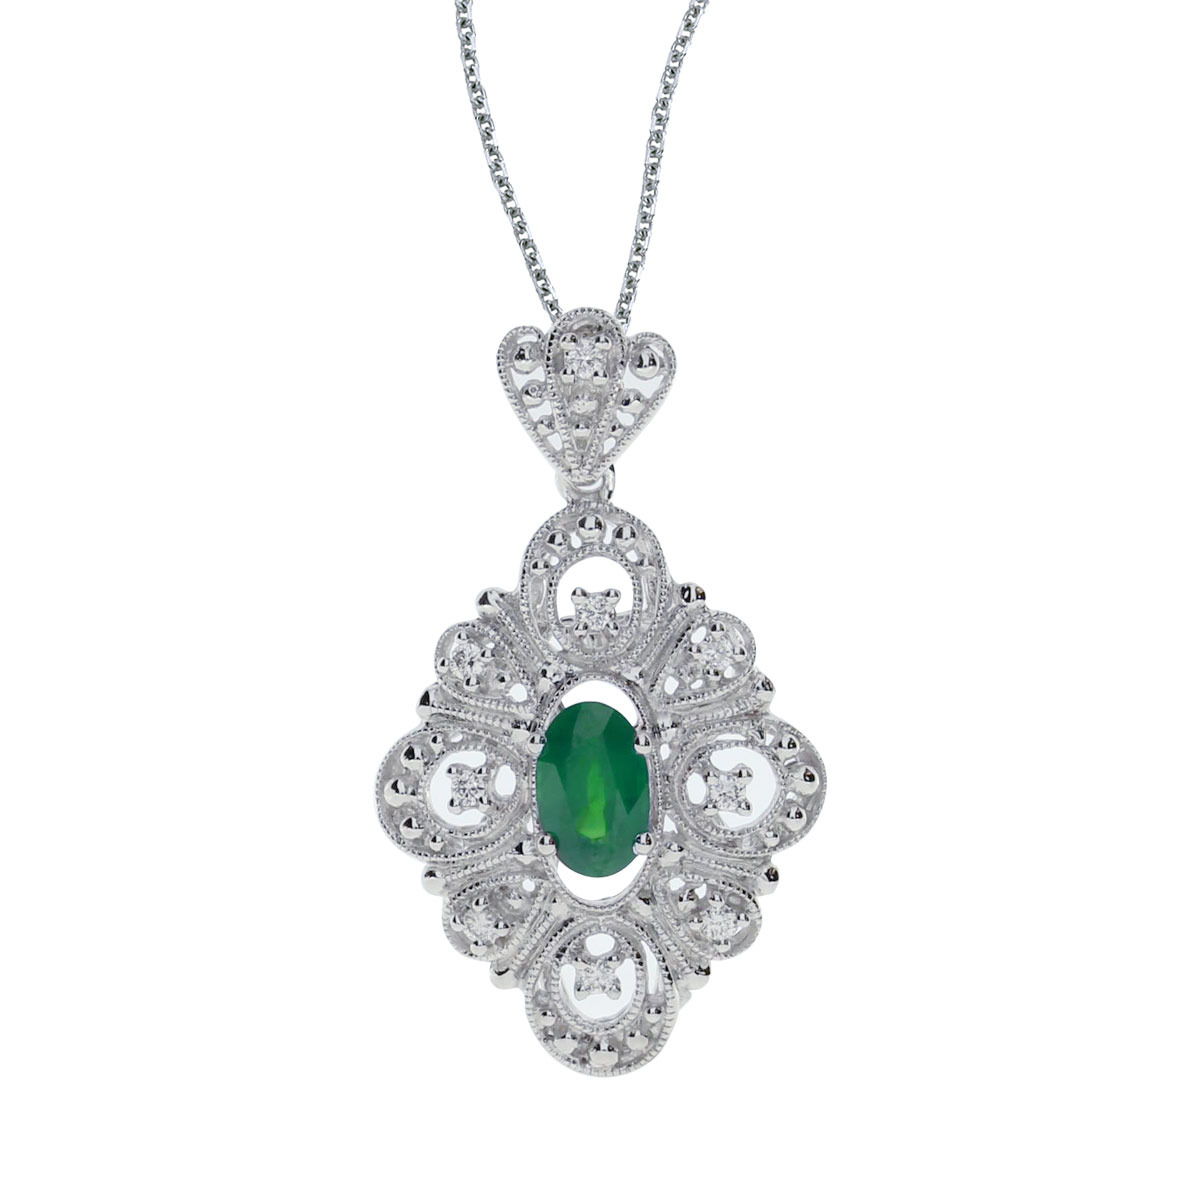 This beautiful 14k white gold pendant features a bright 6x4 mm oval emerald and .08 carats of shimmering diamonds.